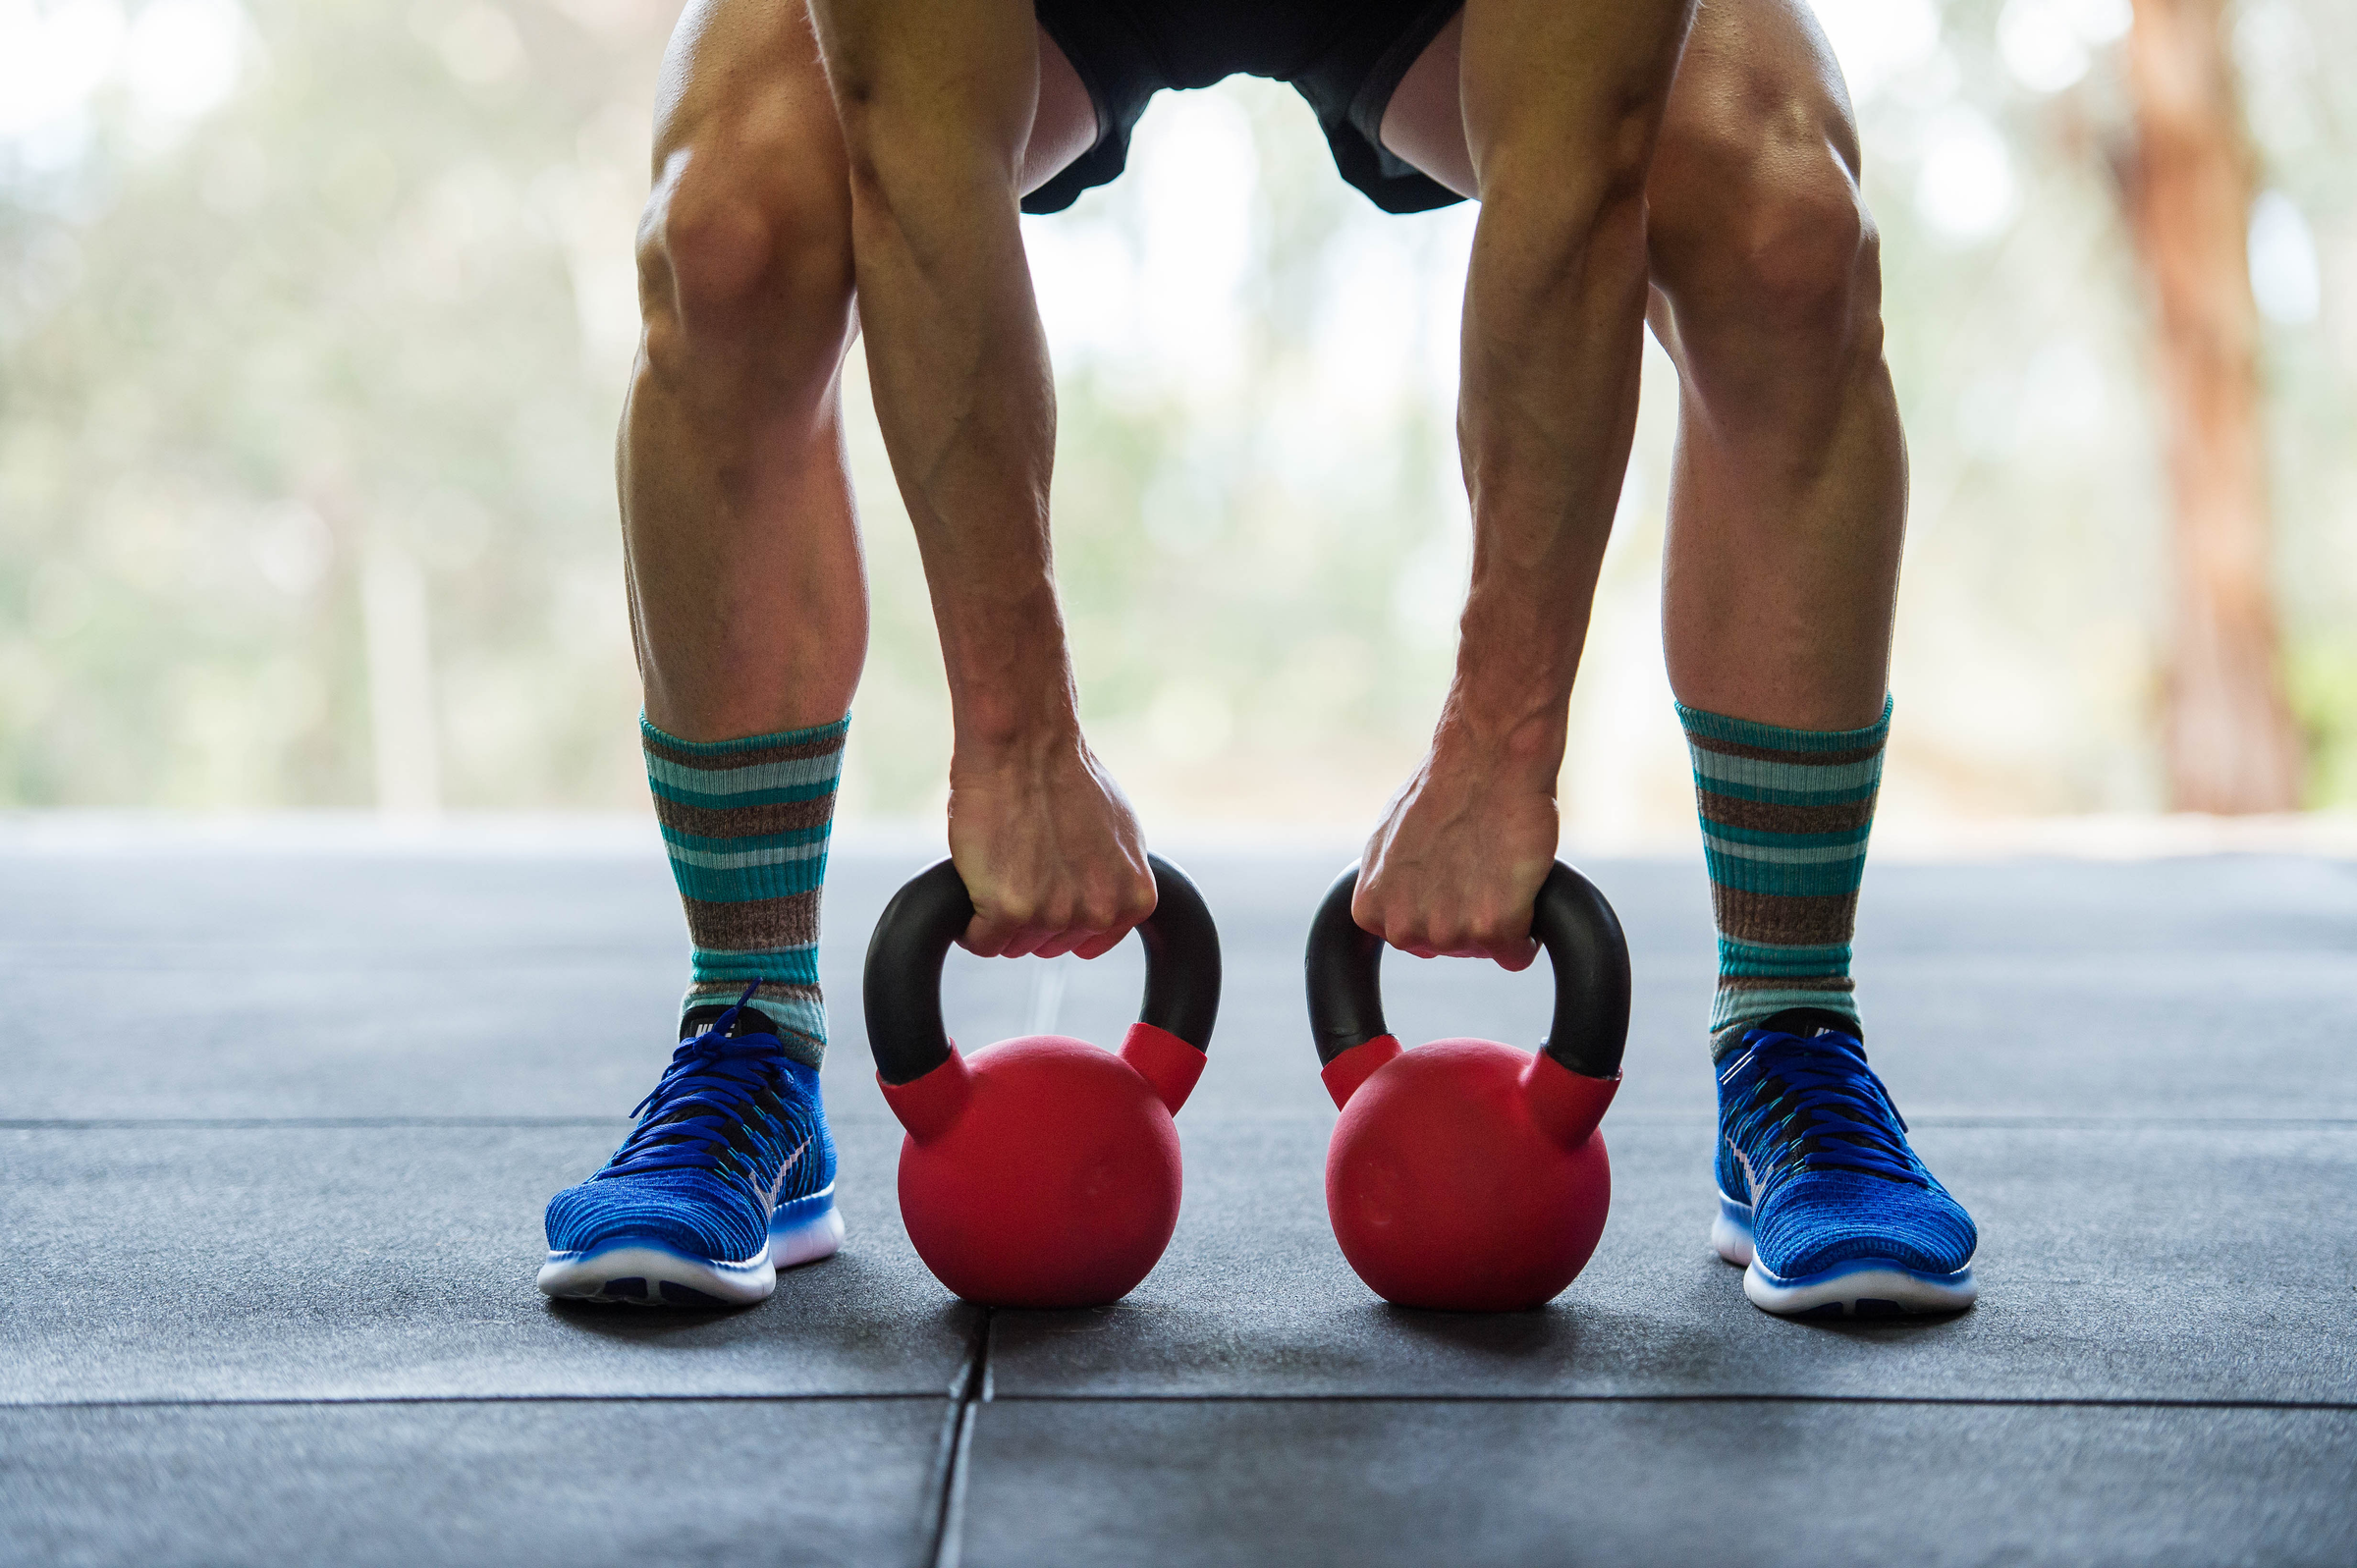 man lifting kettle bells with blister free socks